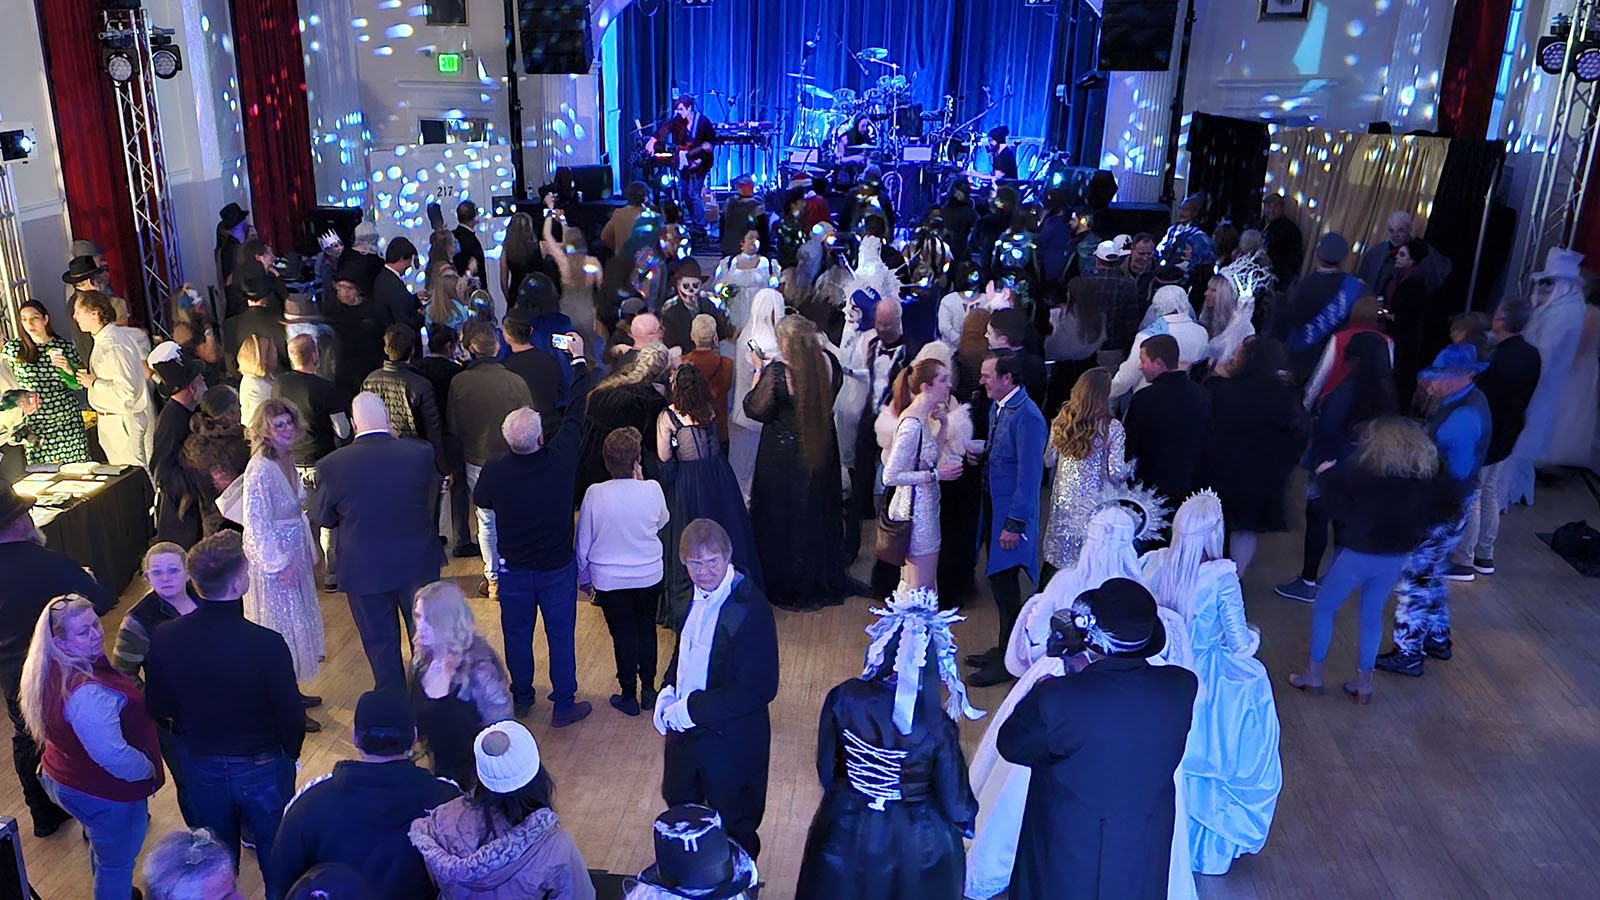 A ballroom full of people dressed in undead costumes twirl around to music during the Blue Ball.